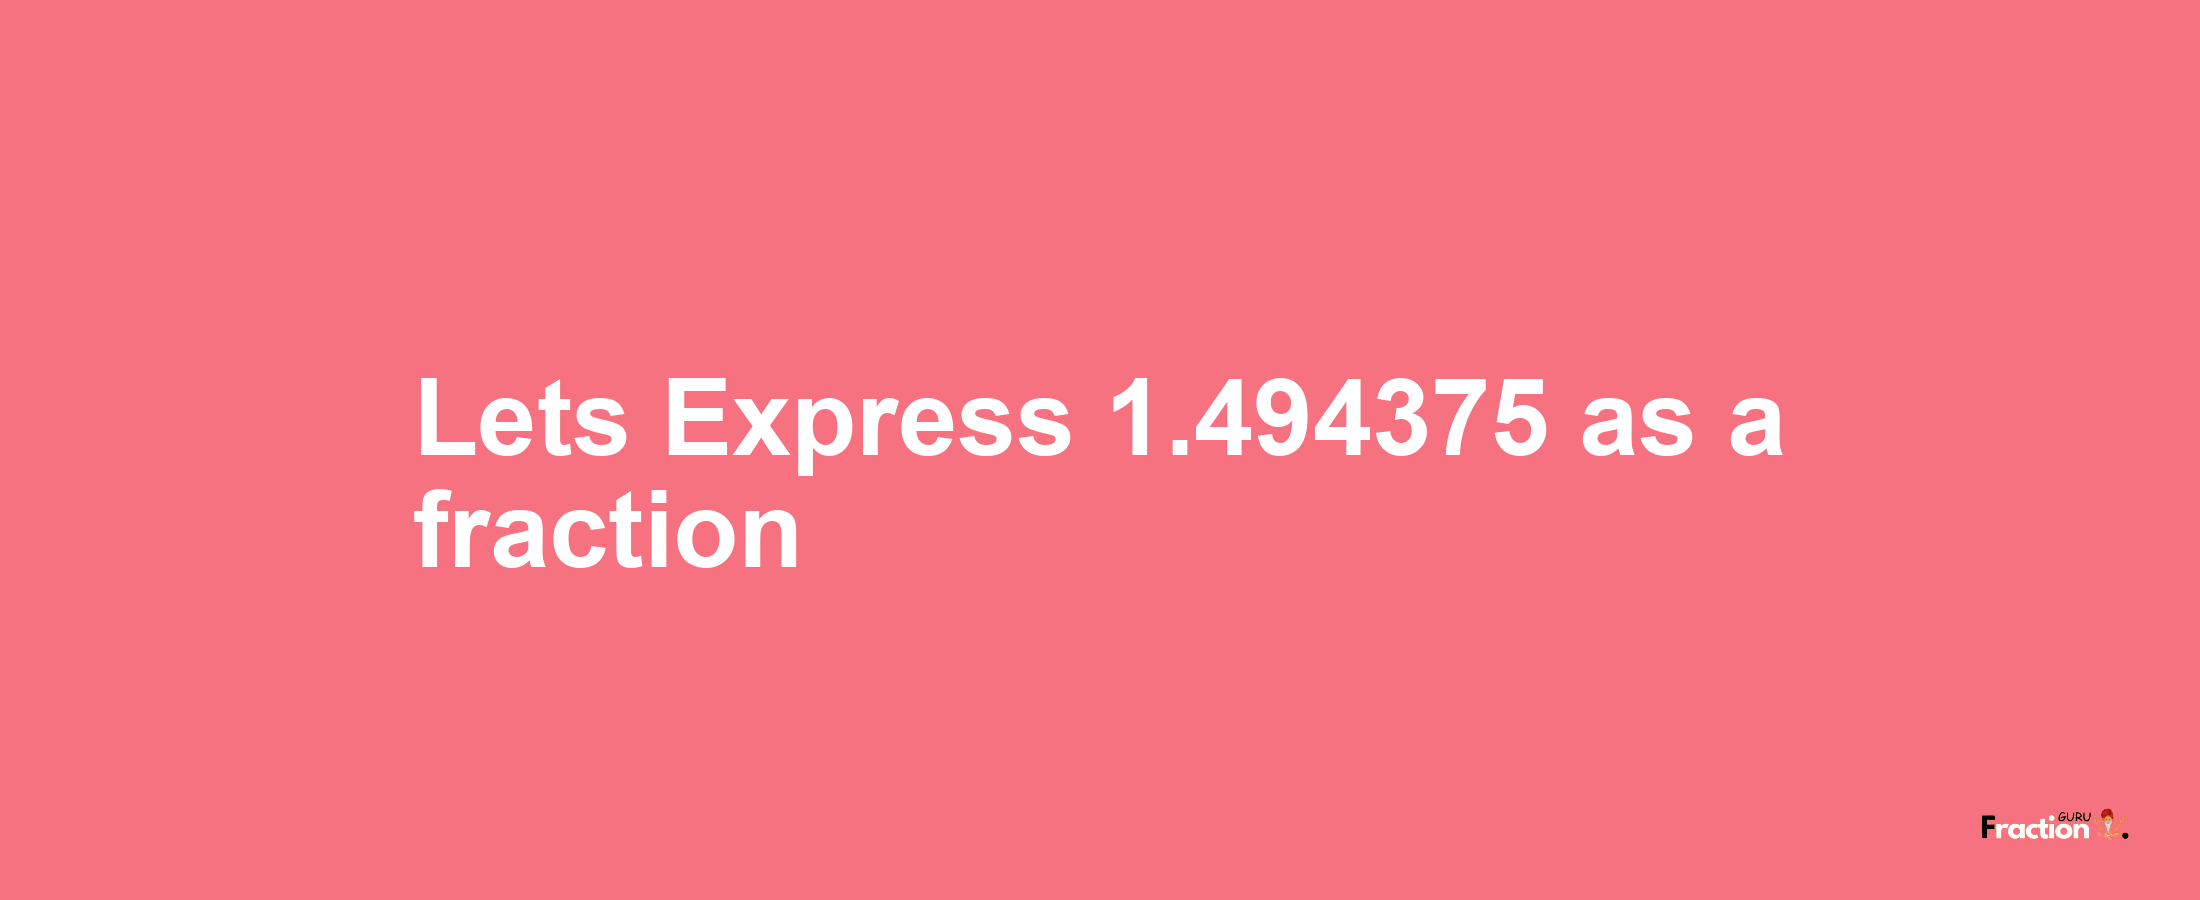 Lets Express 1.494375 as afraction